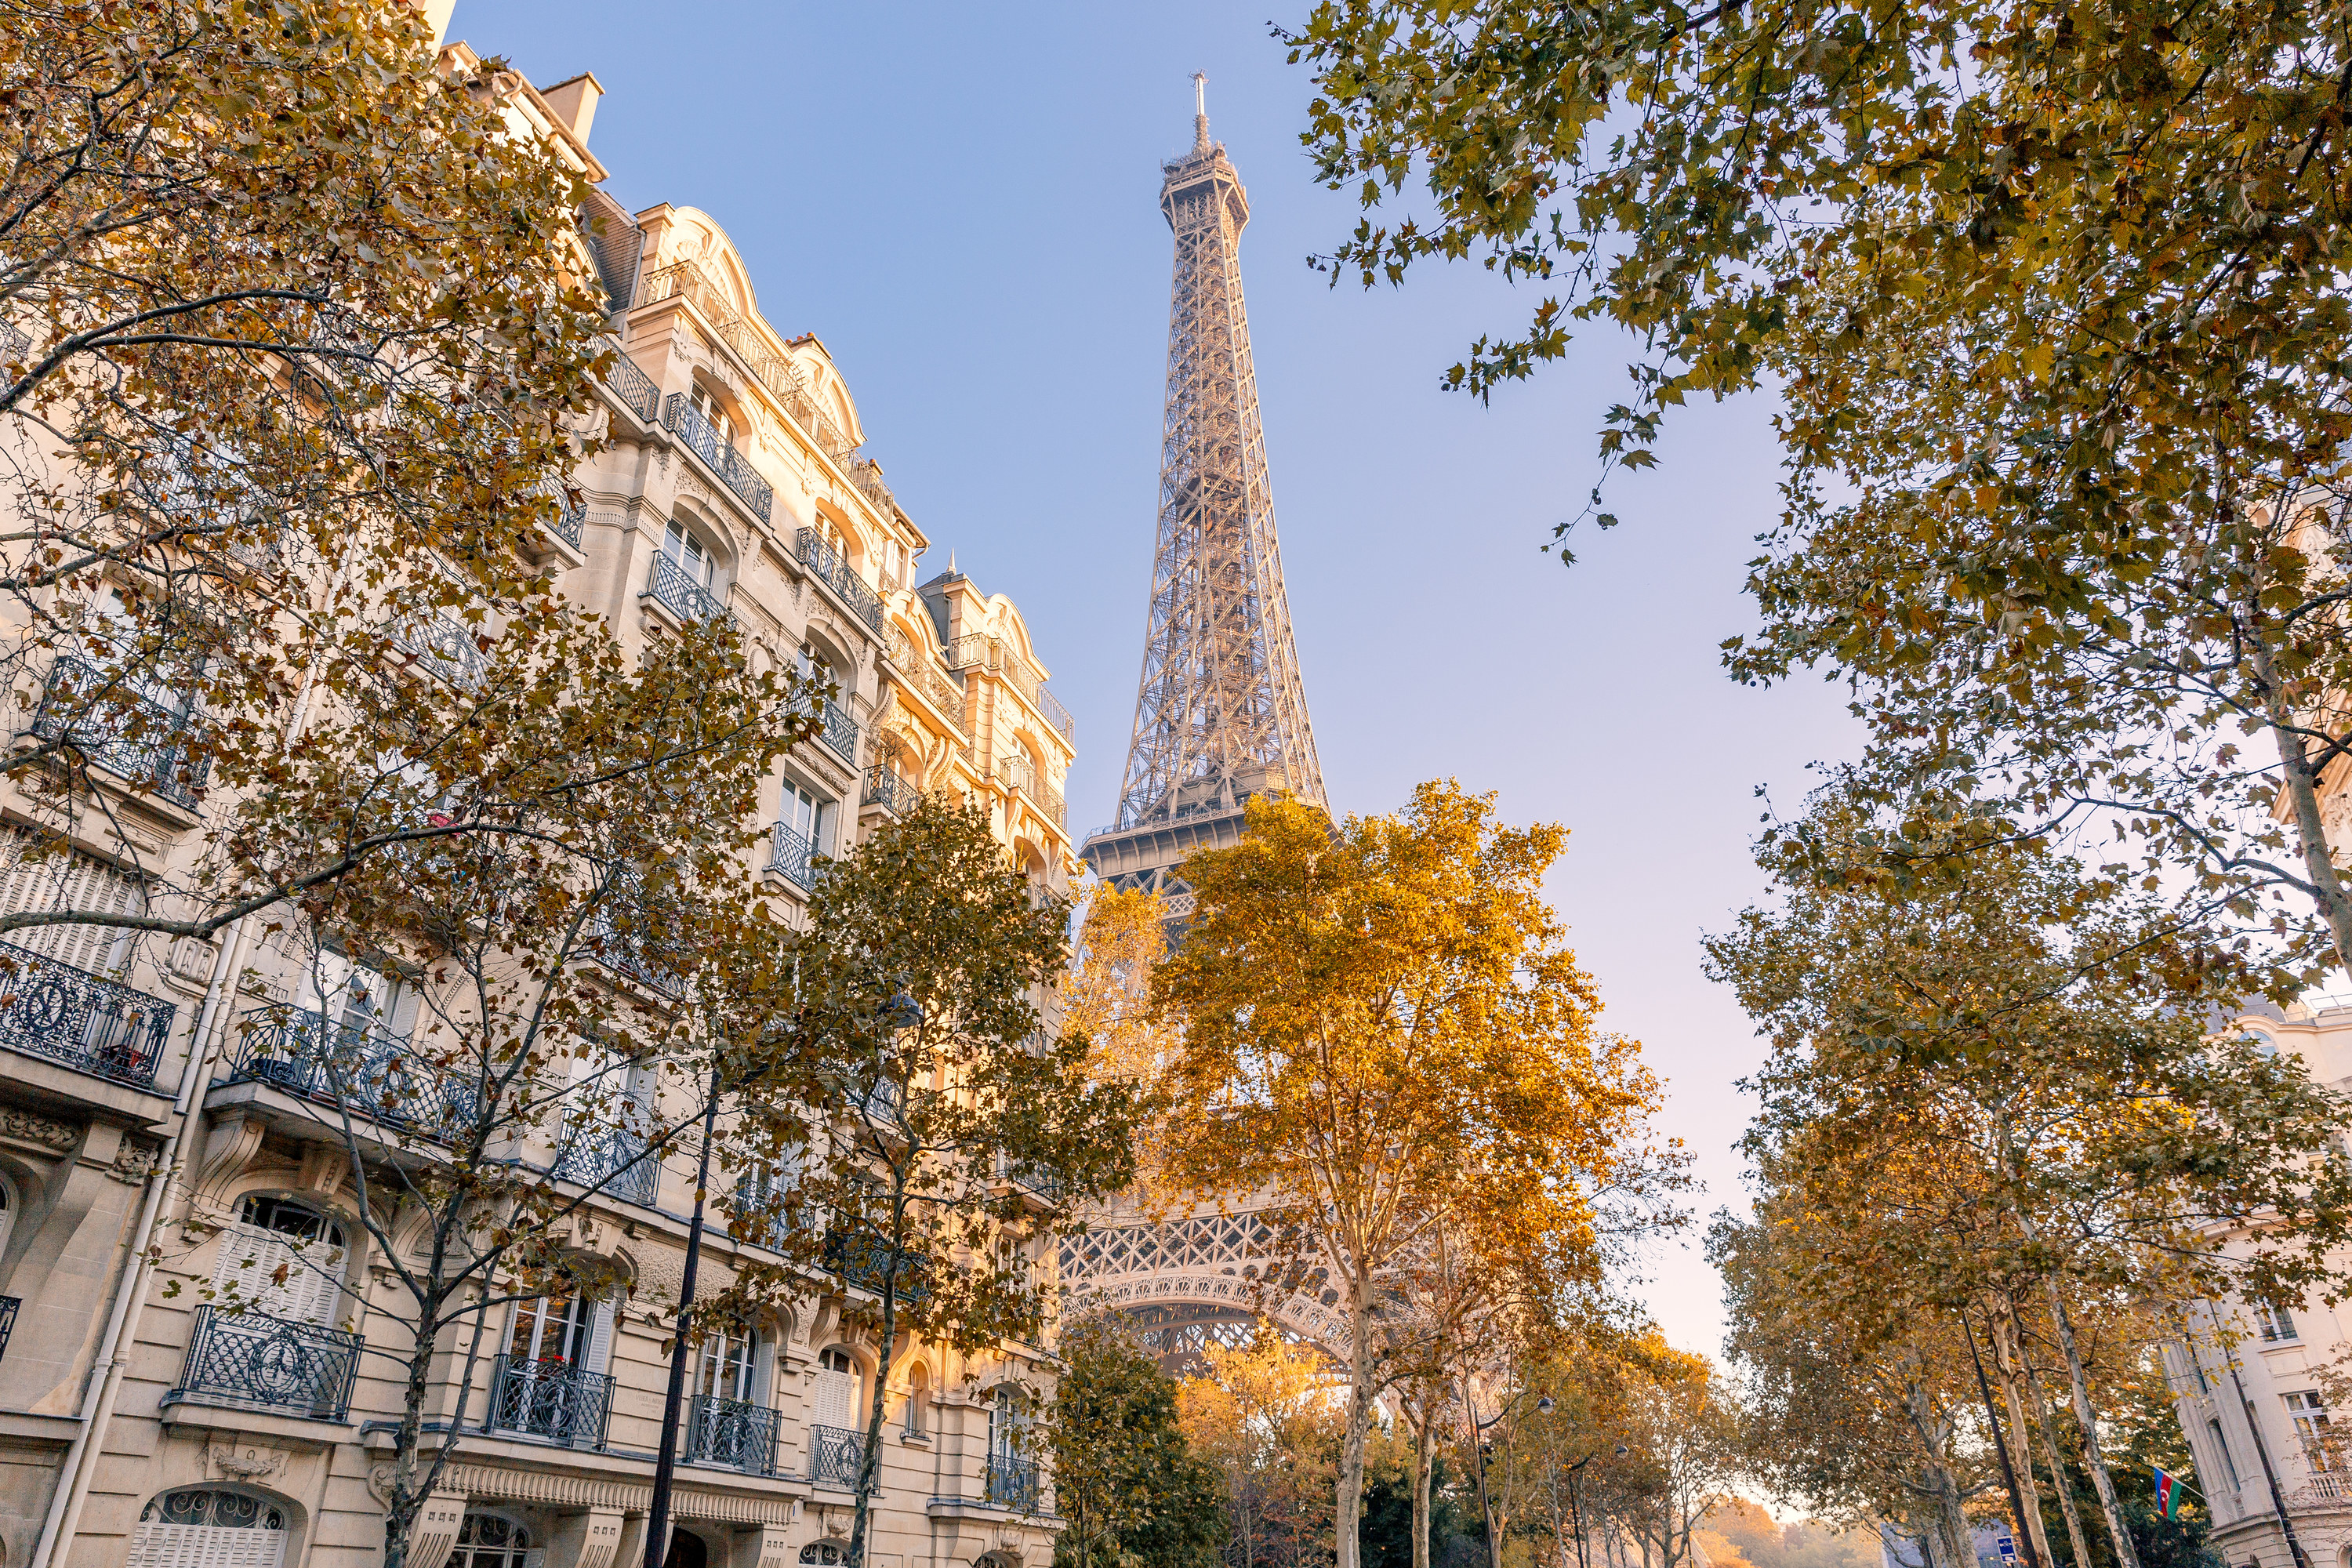 A street in Paris with trees surrounding it with a view of the Eiffel Tower in the background